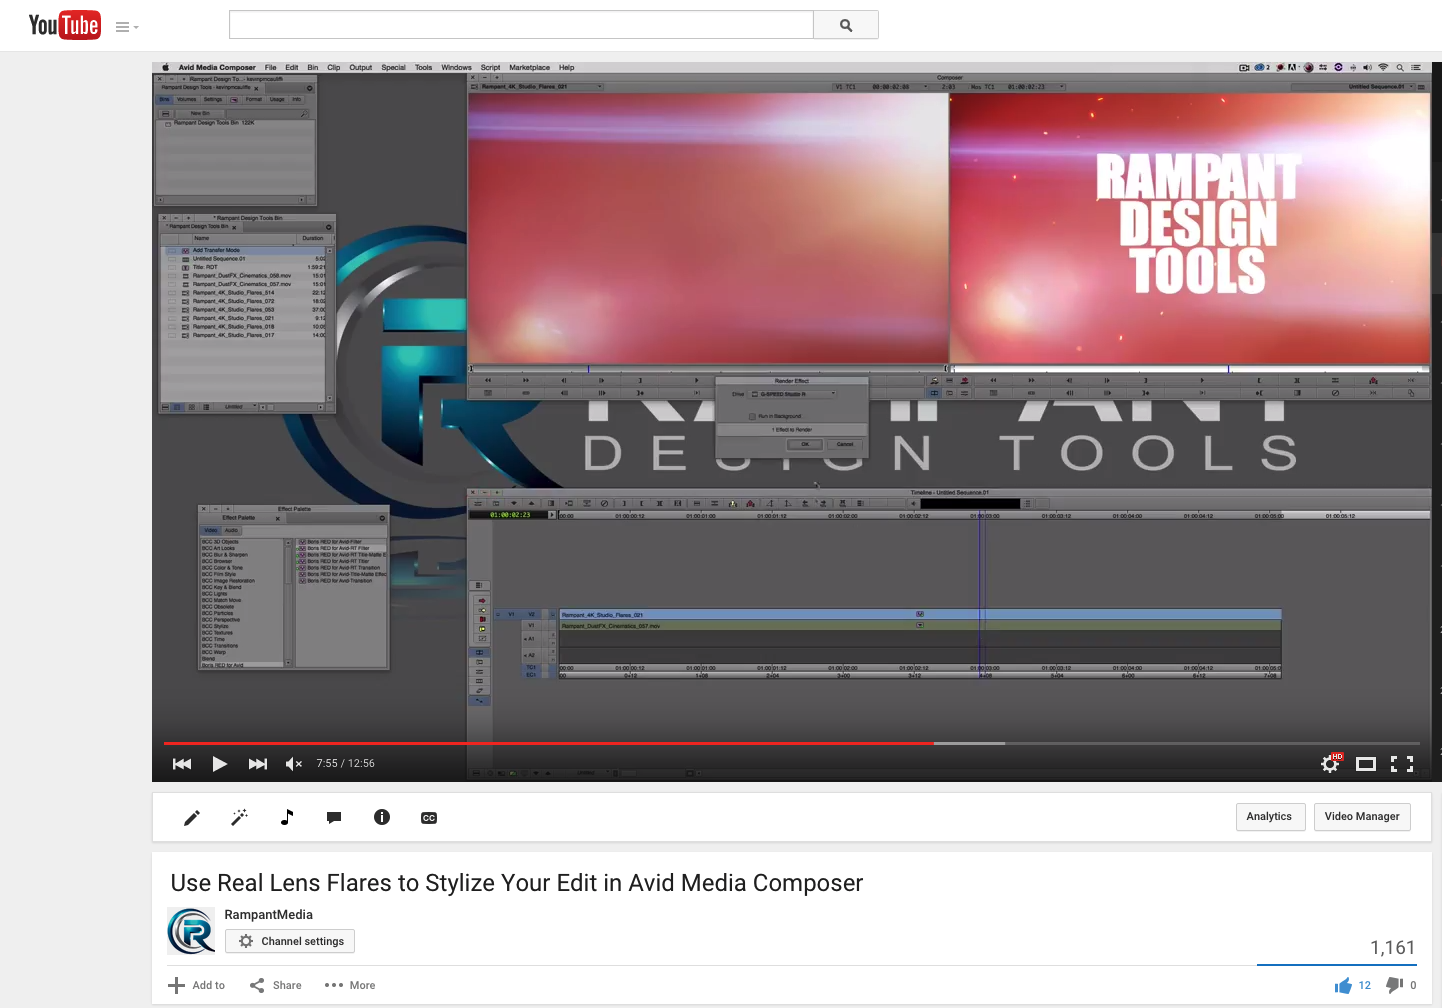 Use Real Lens Flares to Stylize Your Edit in Avid Media Composer